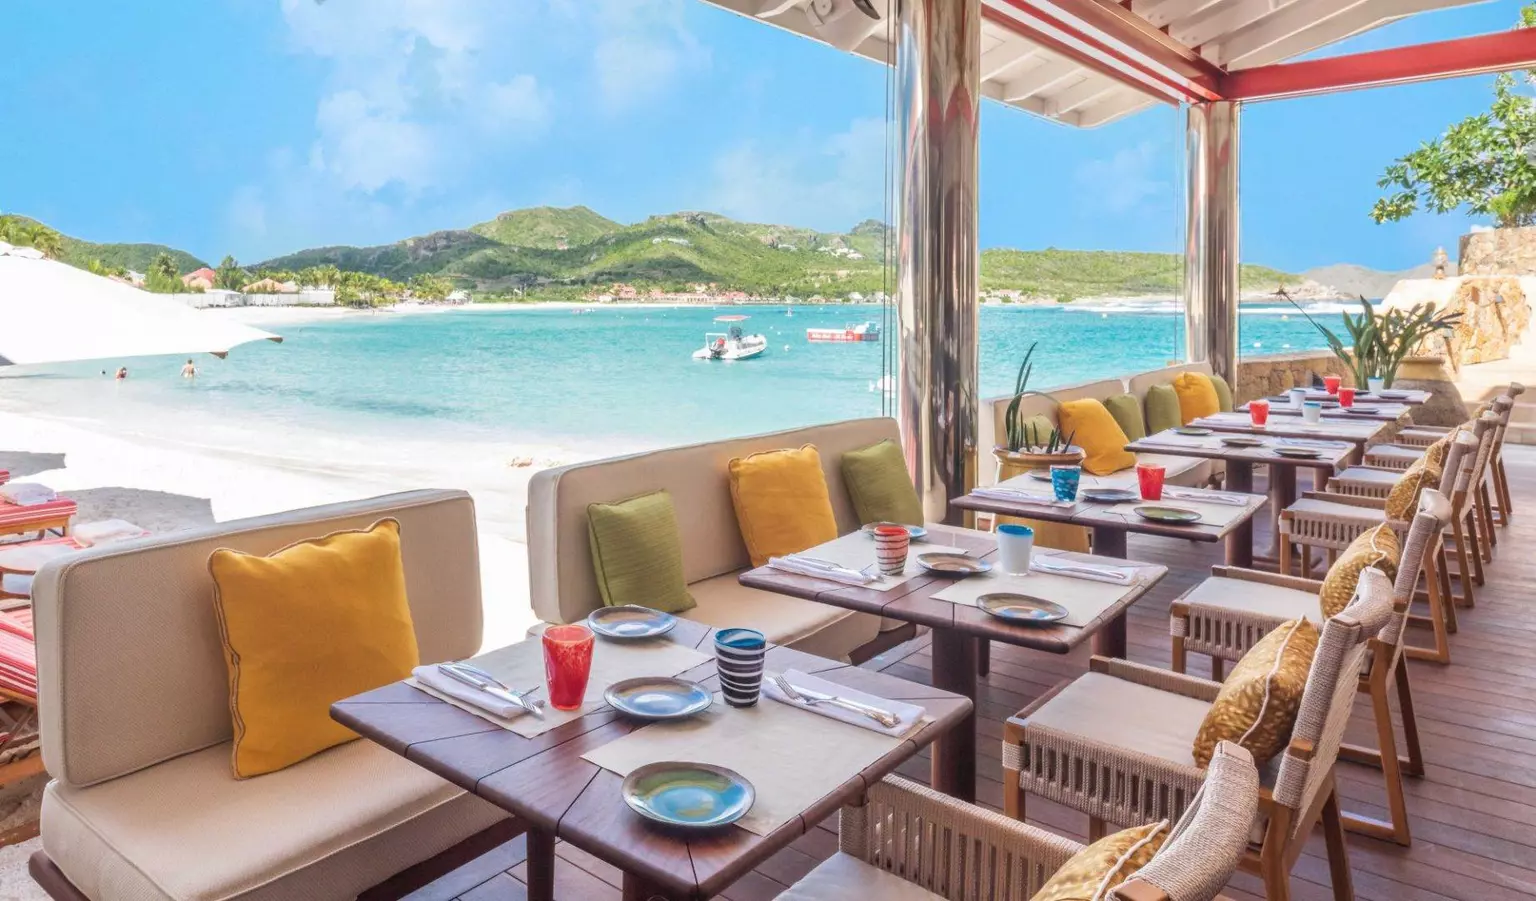 The best supermarkets in St Barth in 2021